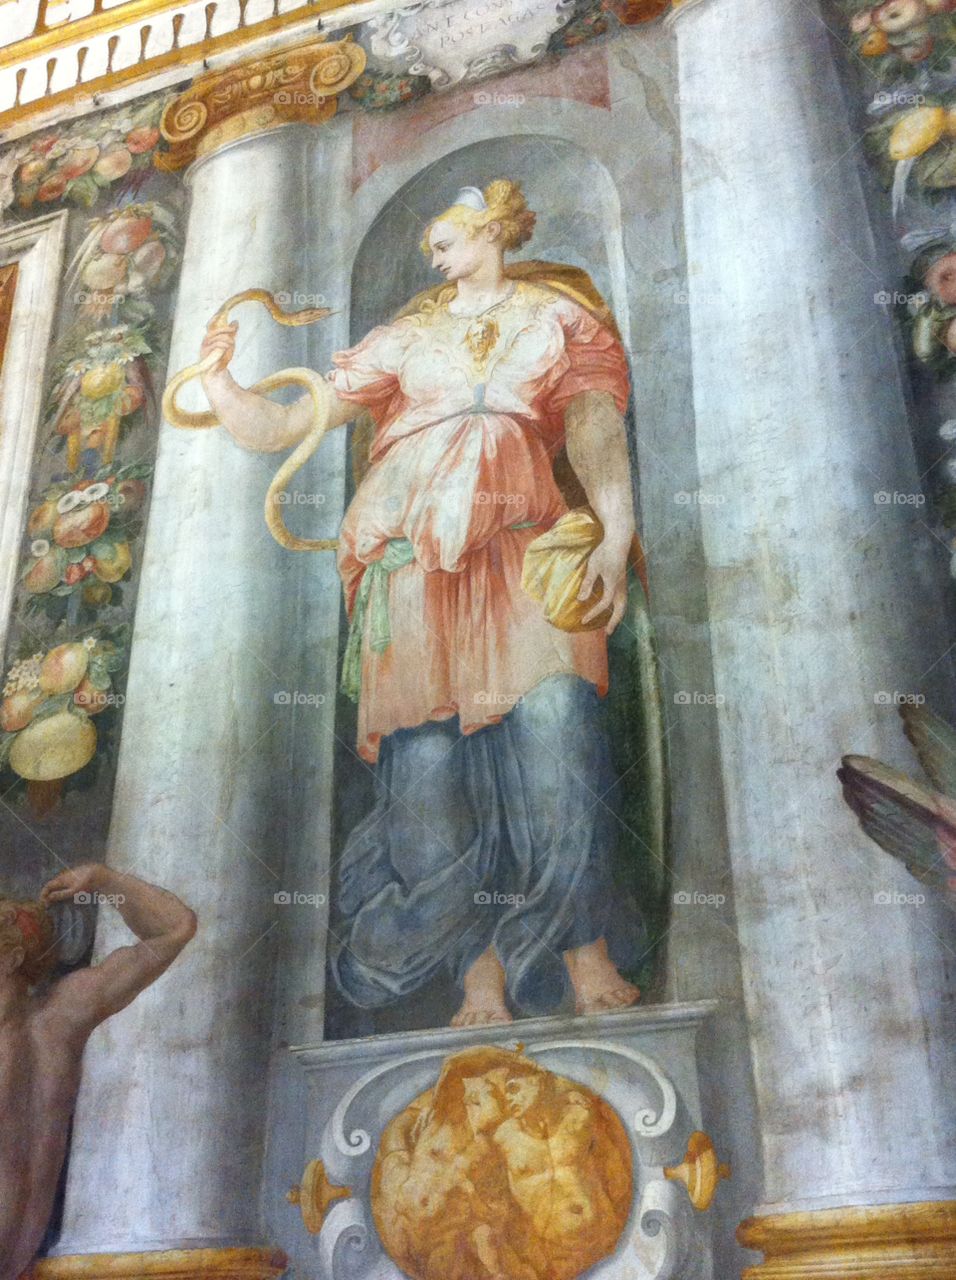 Fresco at Castel Sant' Angelo. A fresco depicting a woman from the Papal living quarters in Castel Sant' Angelo.